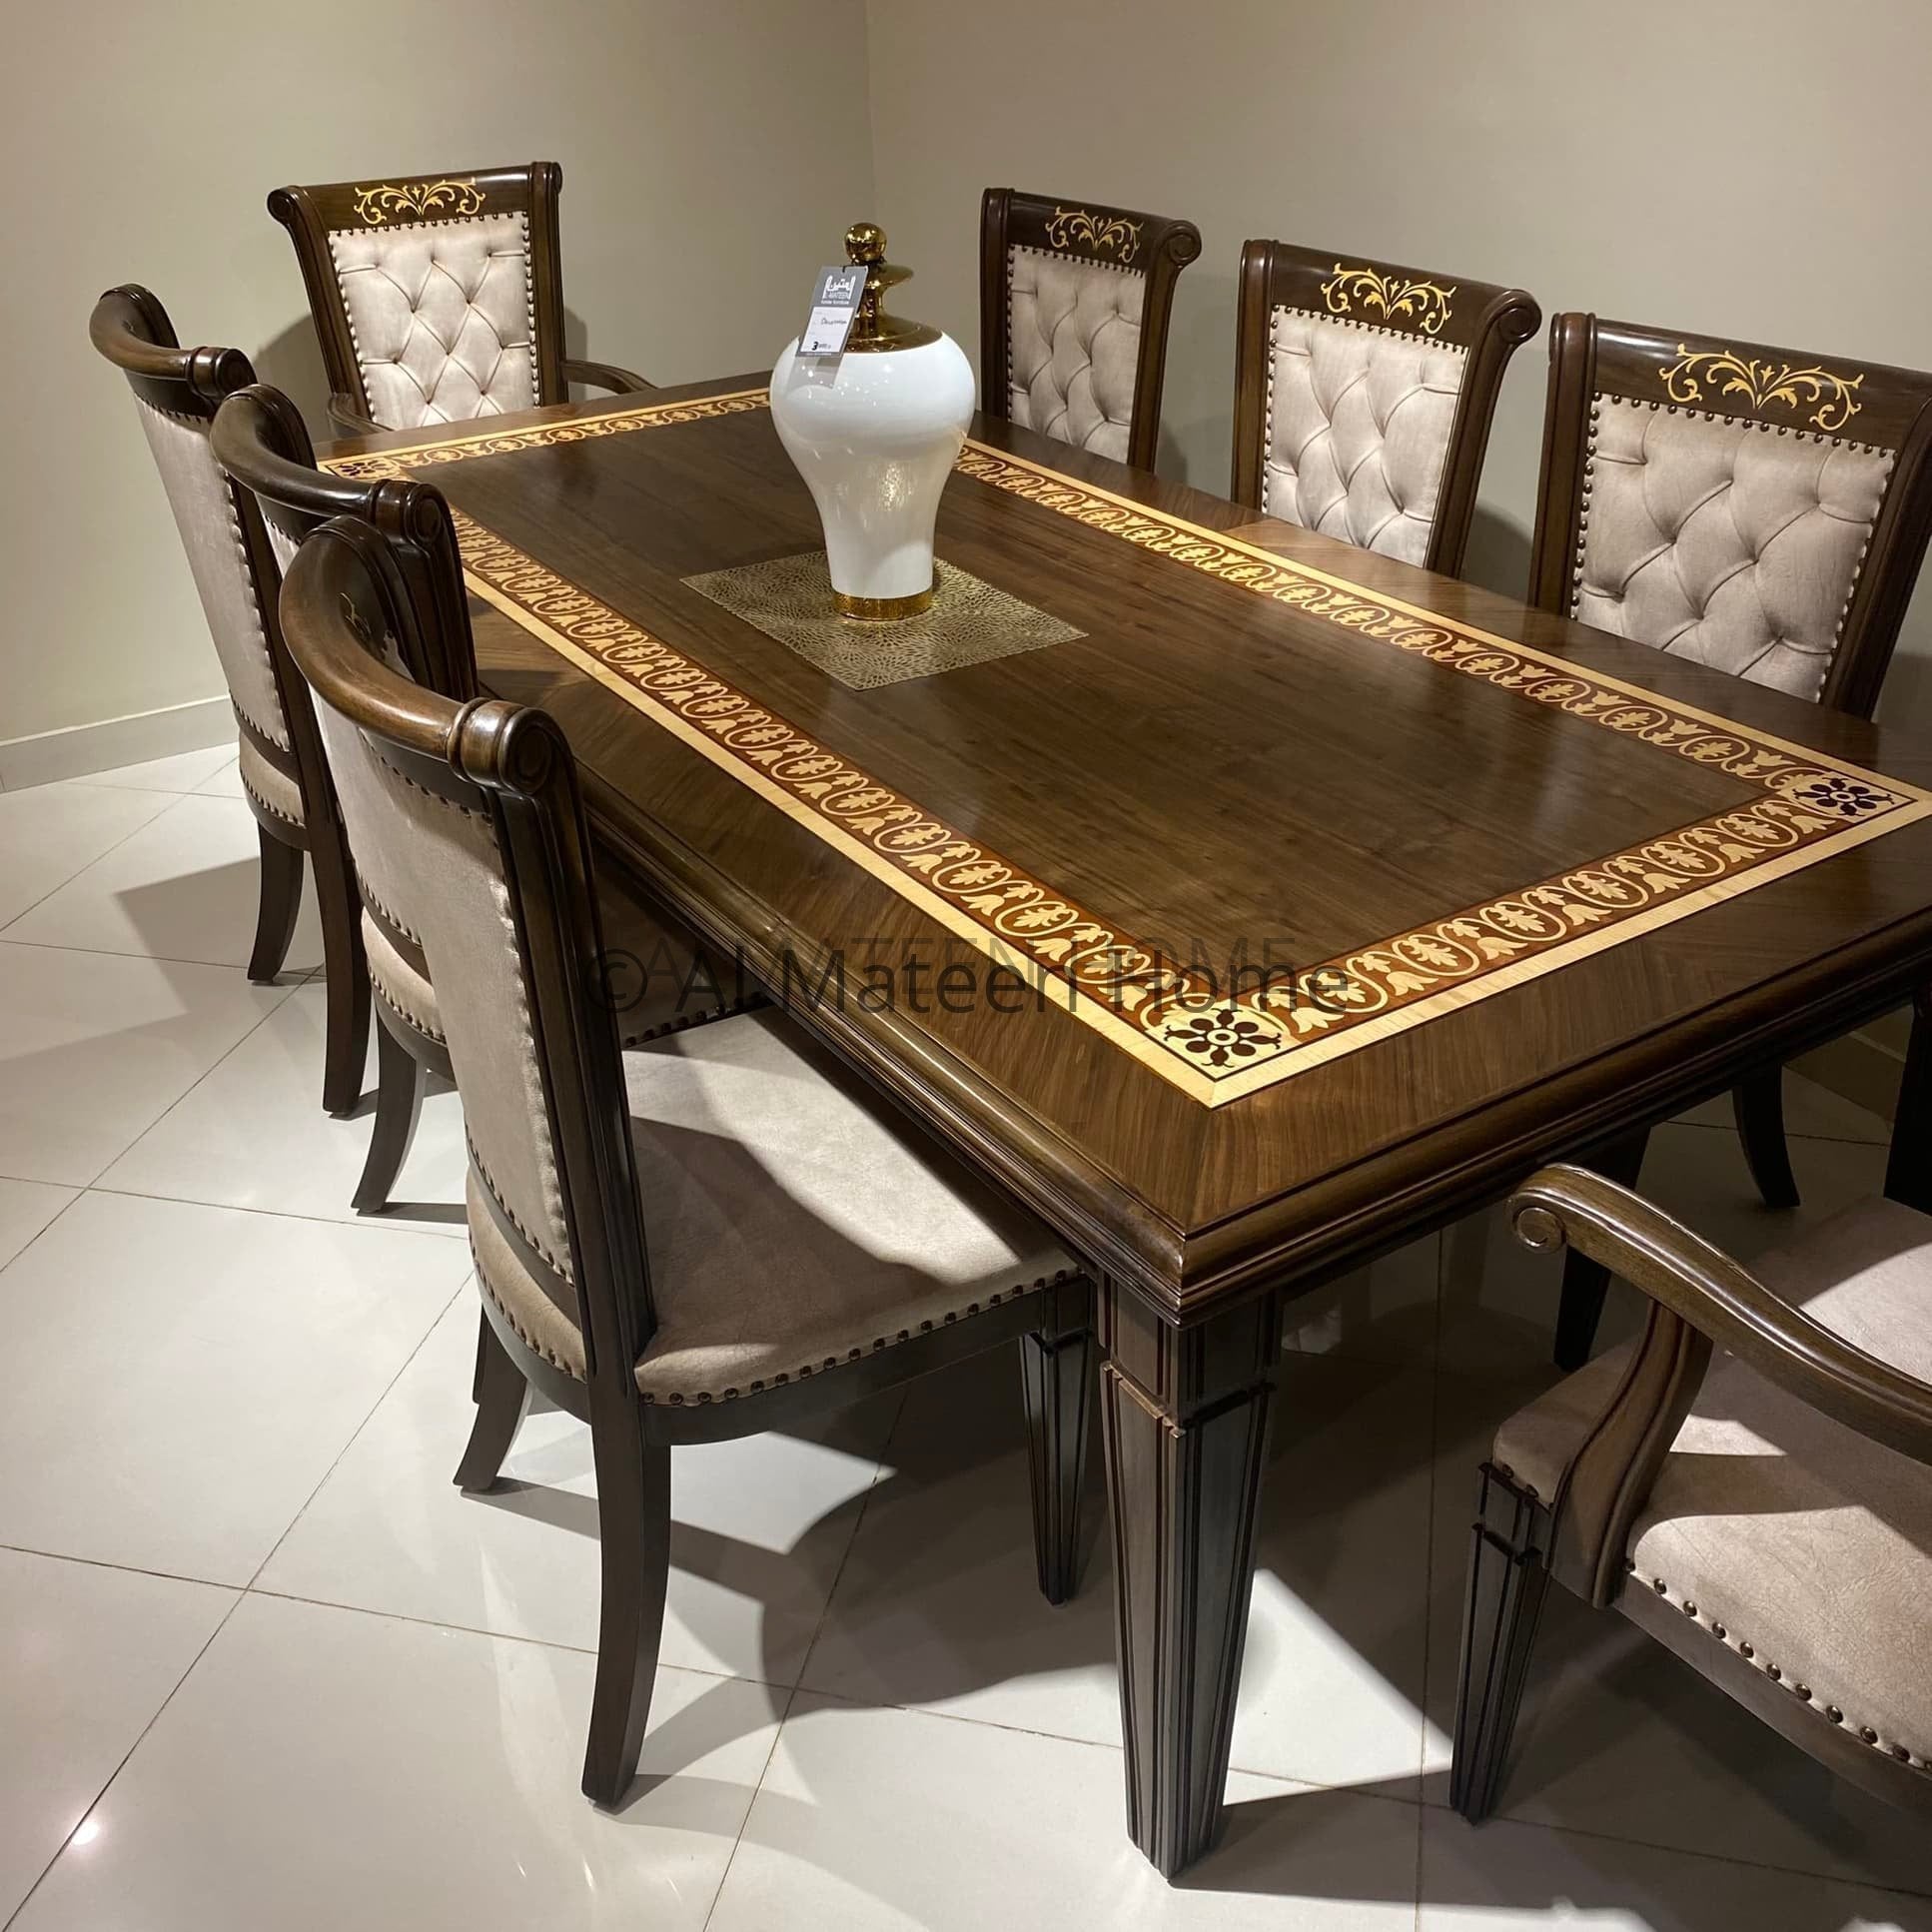 walnut-wood-dining-table-set-with-8-chairs-arh-200-7- AL Mateen Home